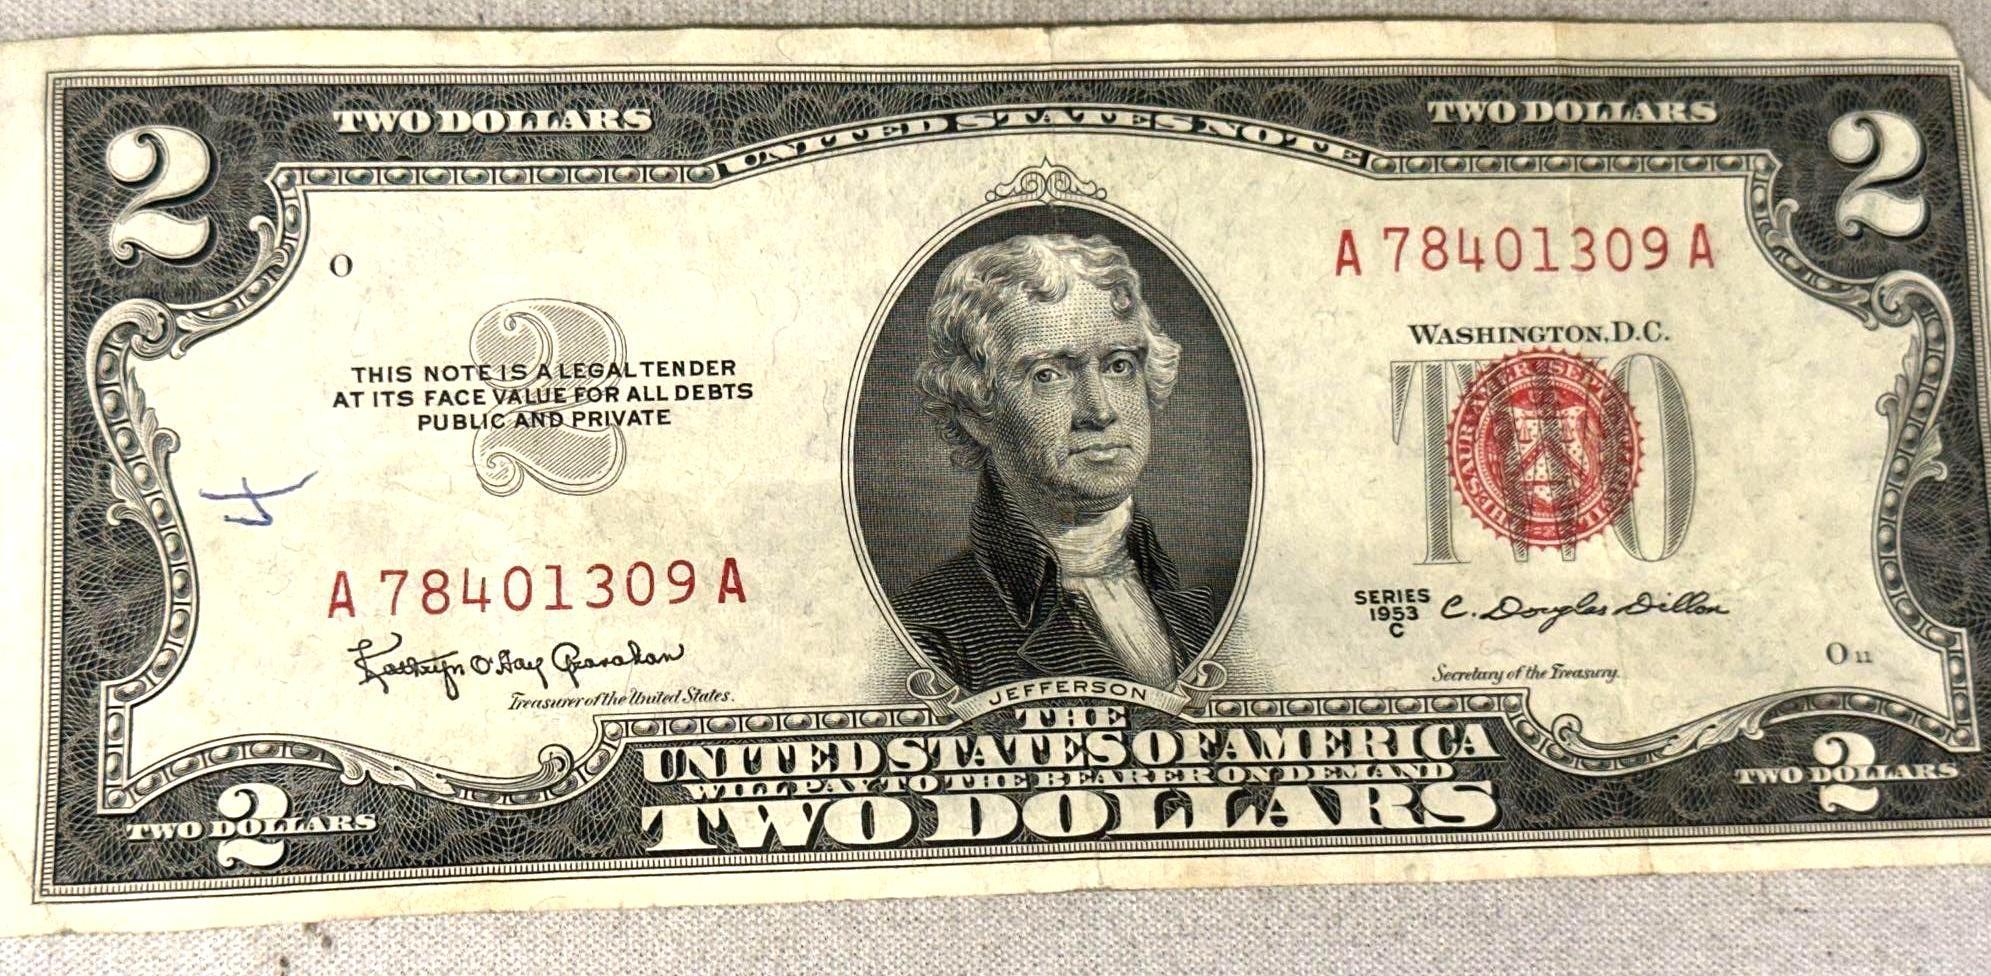 Two Red Seal $2 Bills- 1953 C and 1963 A